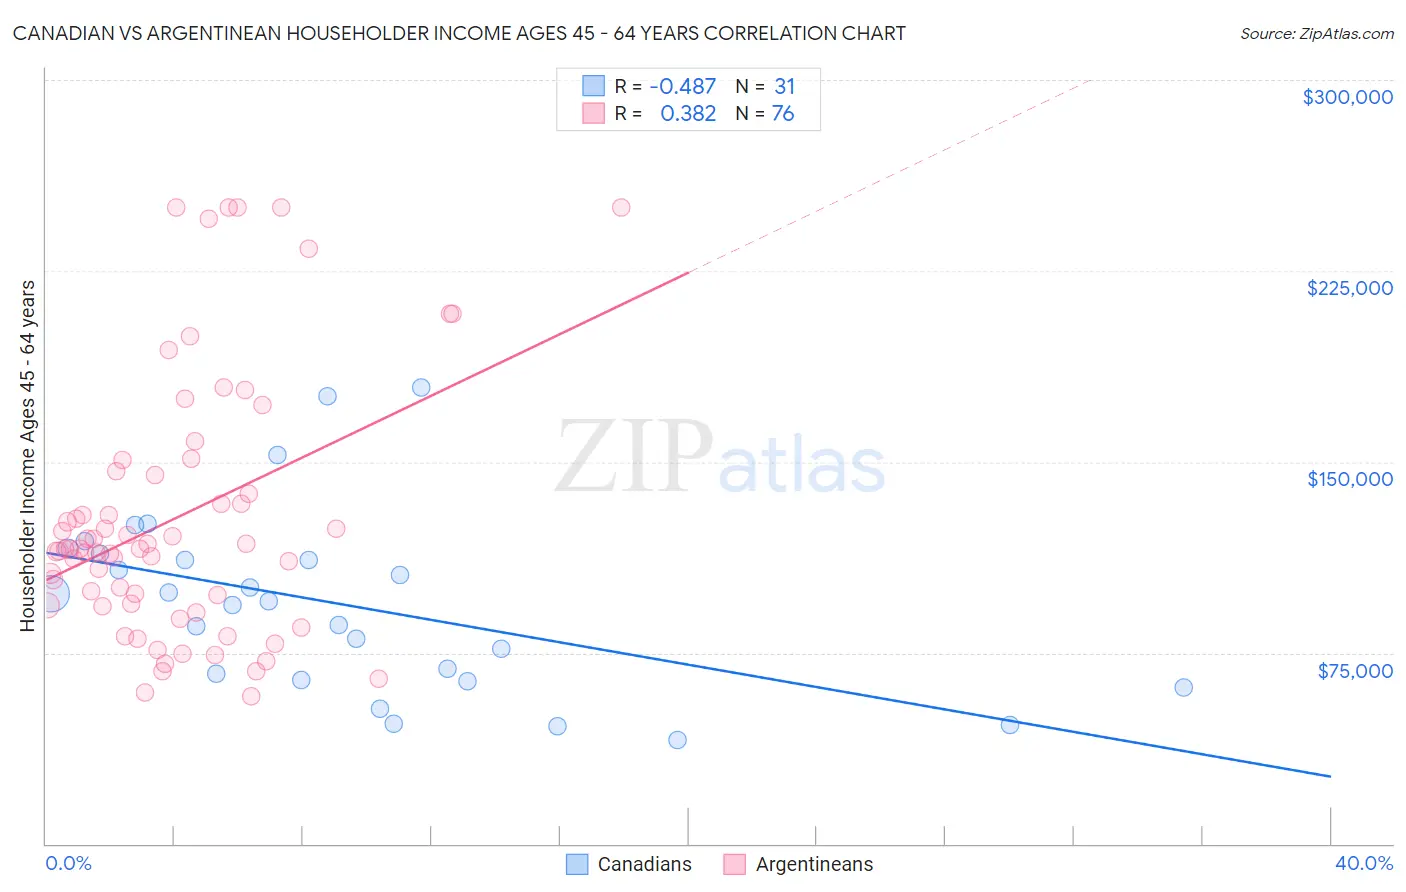 Canadian vs Argentinean Householder Income Ages 45 - 64 years